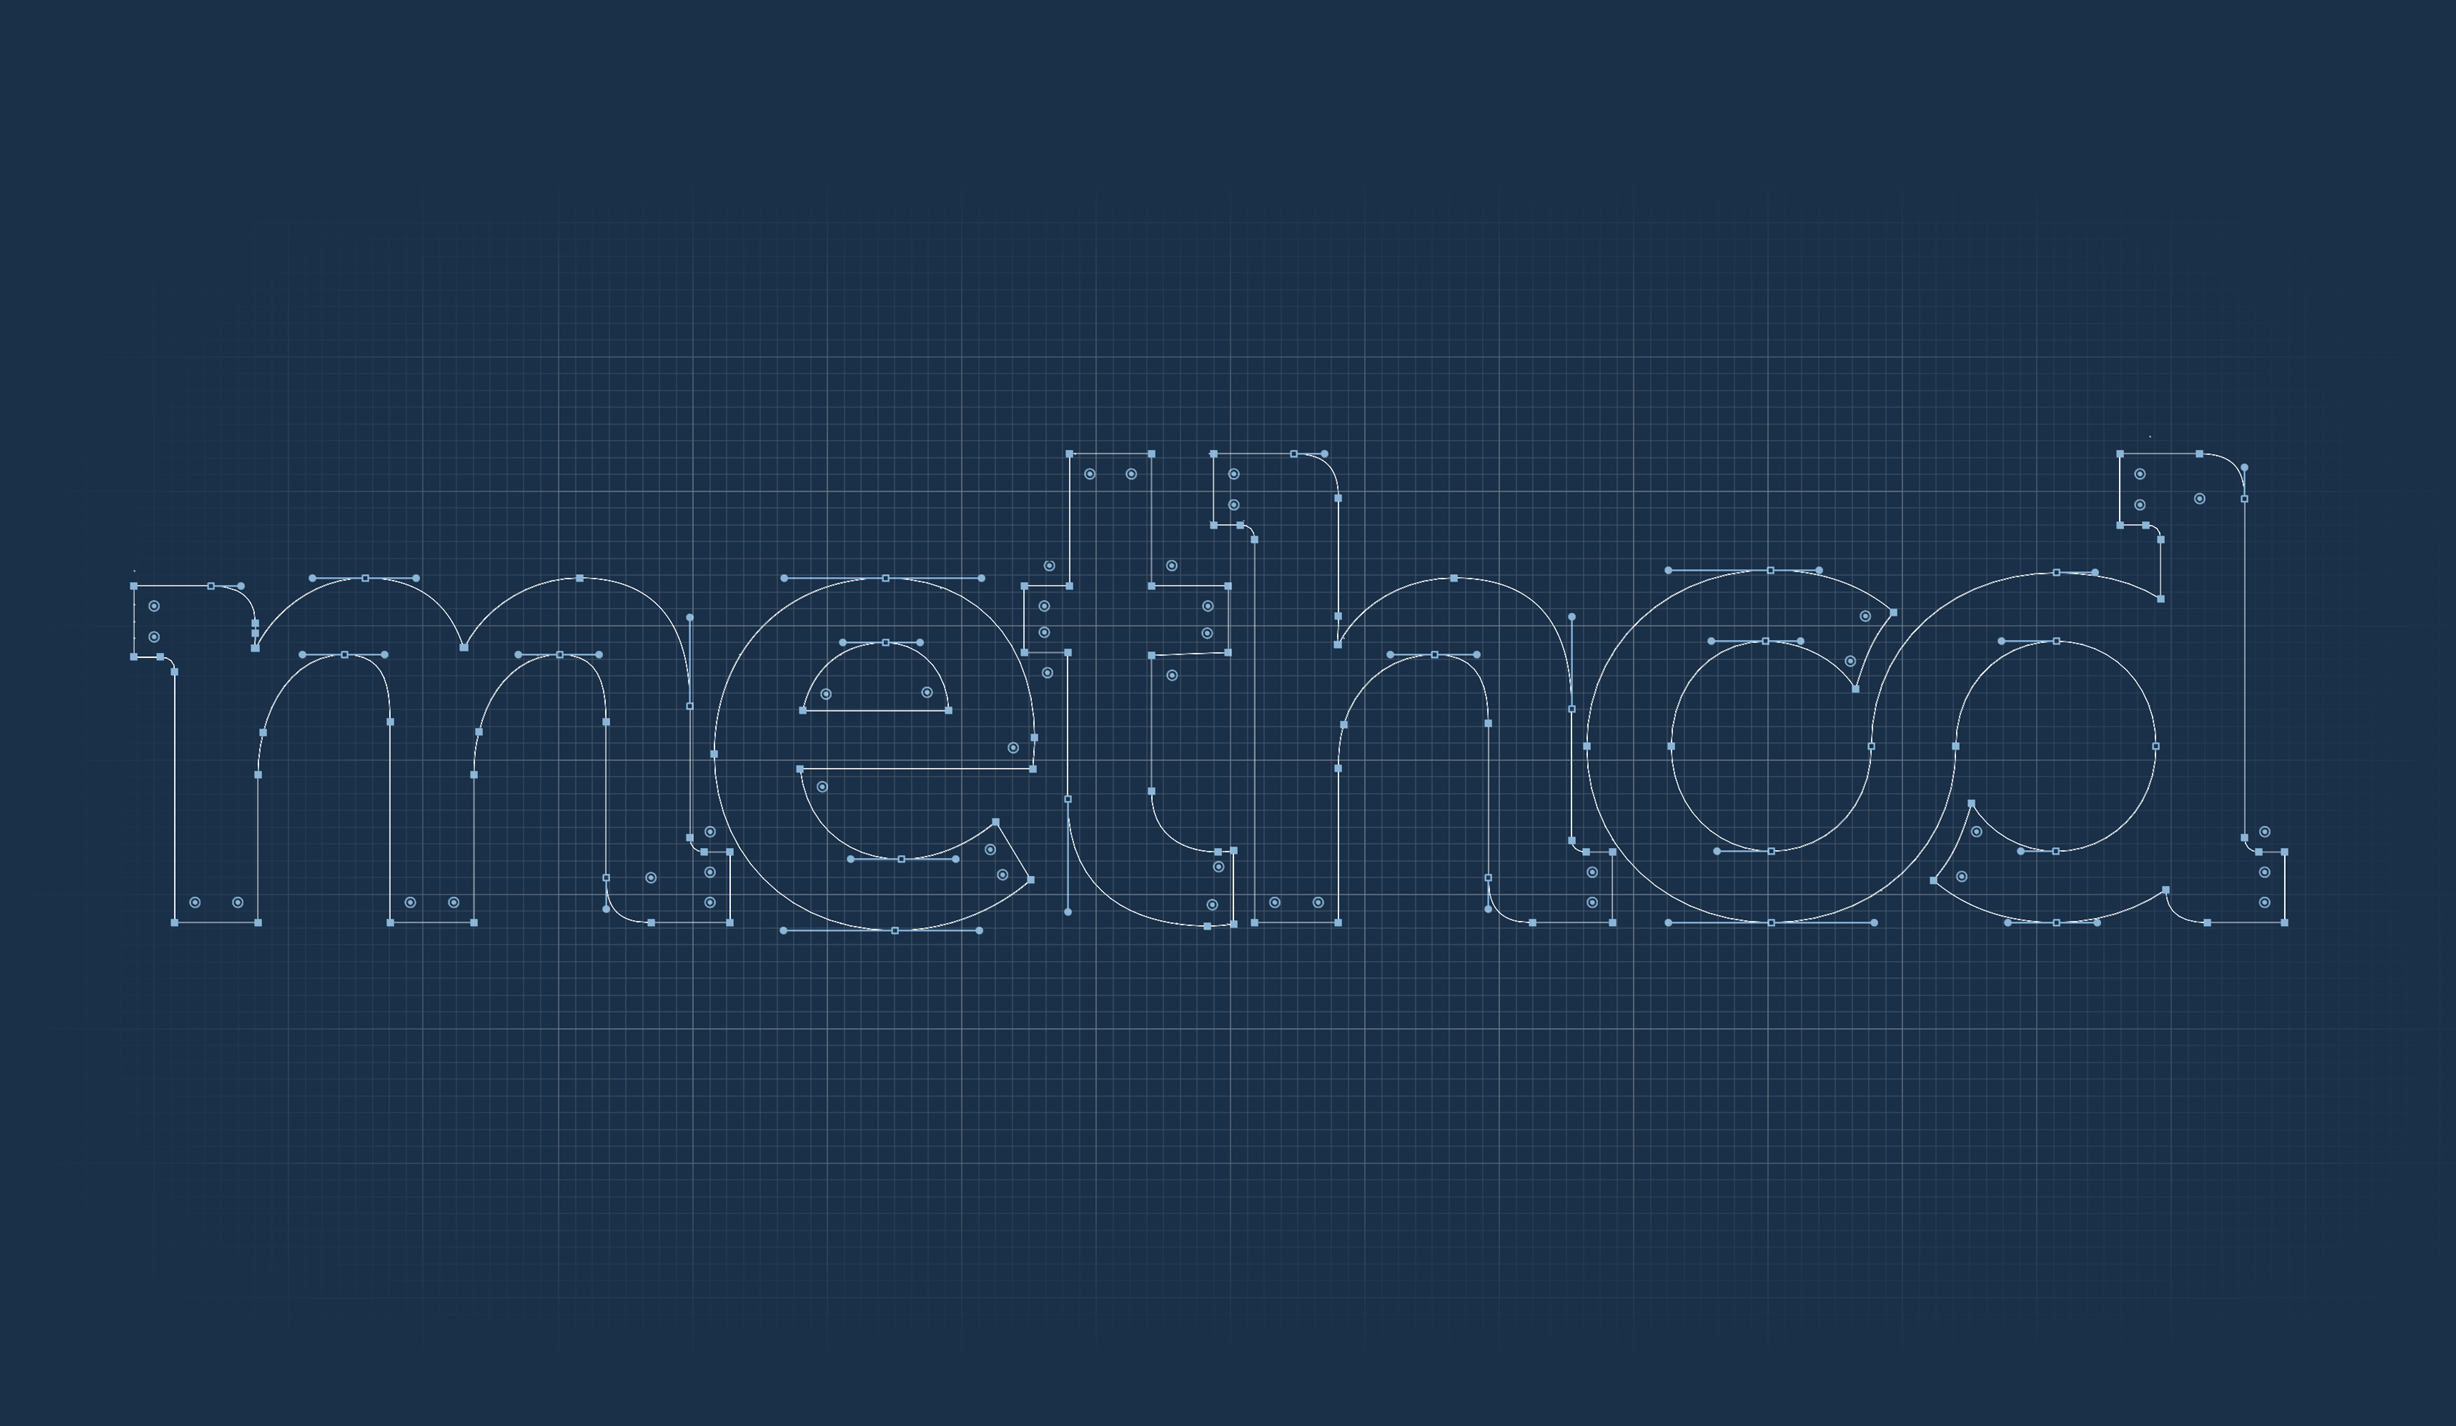 Method logo on a grid with handles at vertices